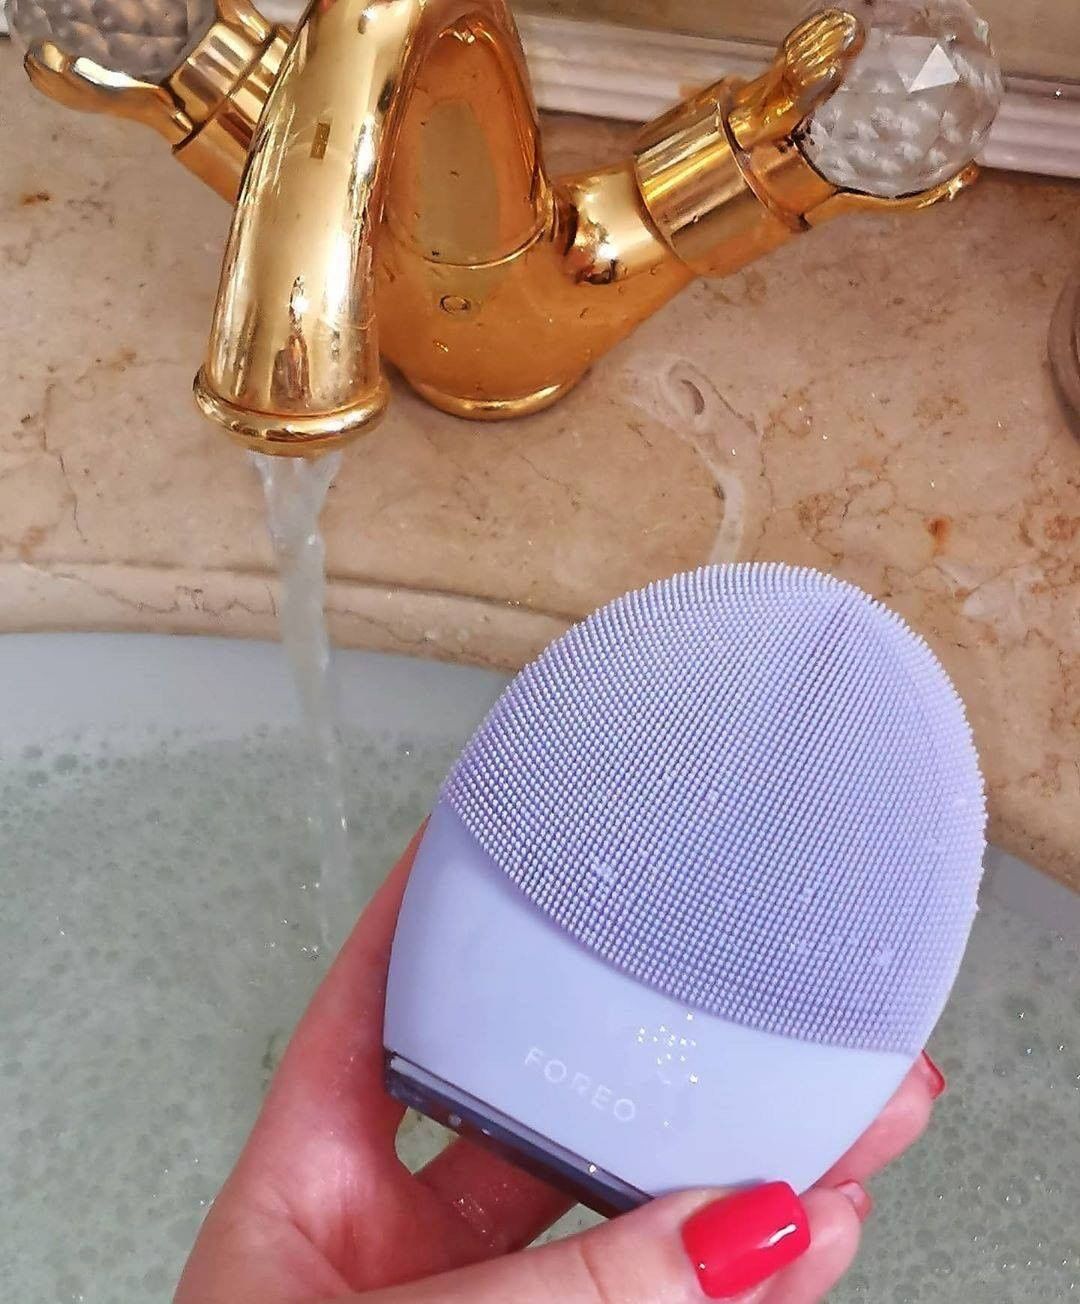 FOREO - A good skincare routine always starts with cleansing 💜⁣⁣
⁣⁣
LUNA 3 redefines the meaning of a perfect cleanse ✨ No matter how long or hard you scrub with your hands, they’ll never get your fac...